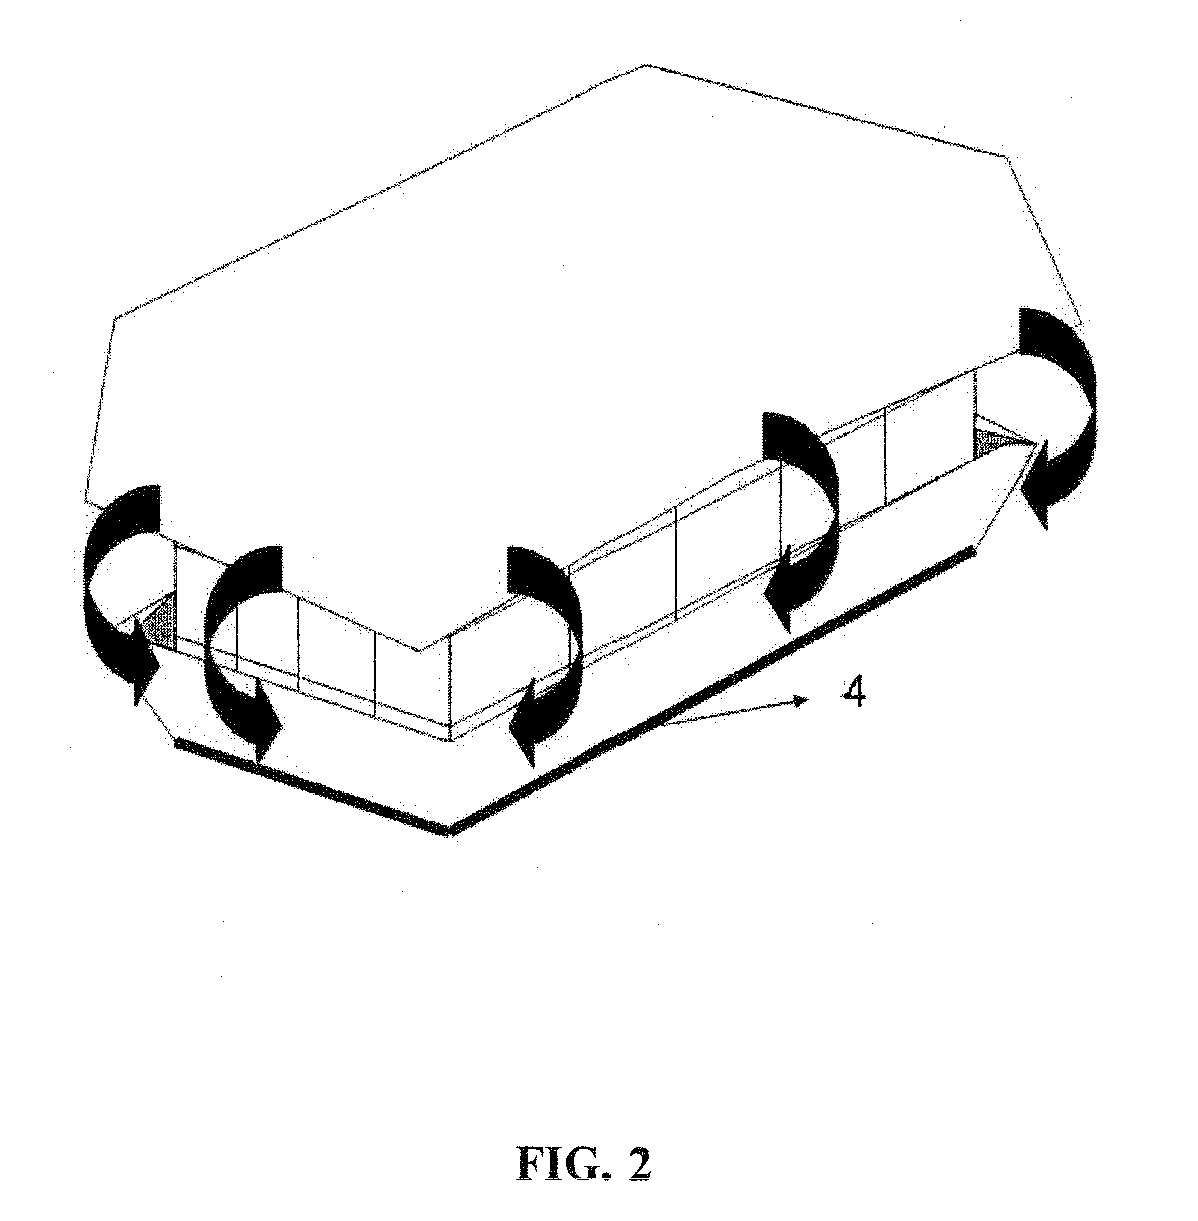 Method and Apparatus for Wrapping a Shipment